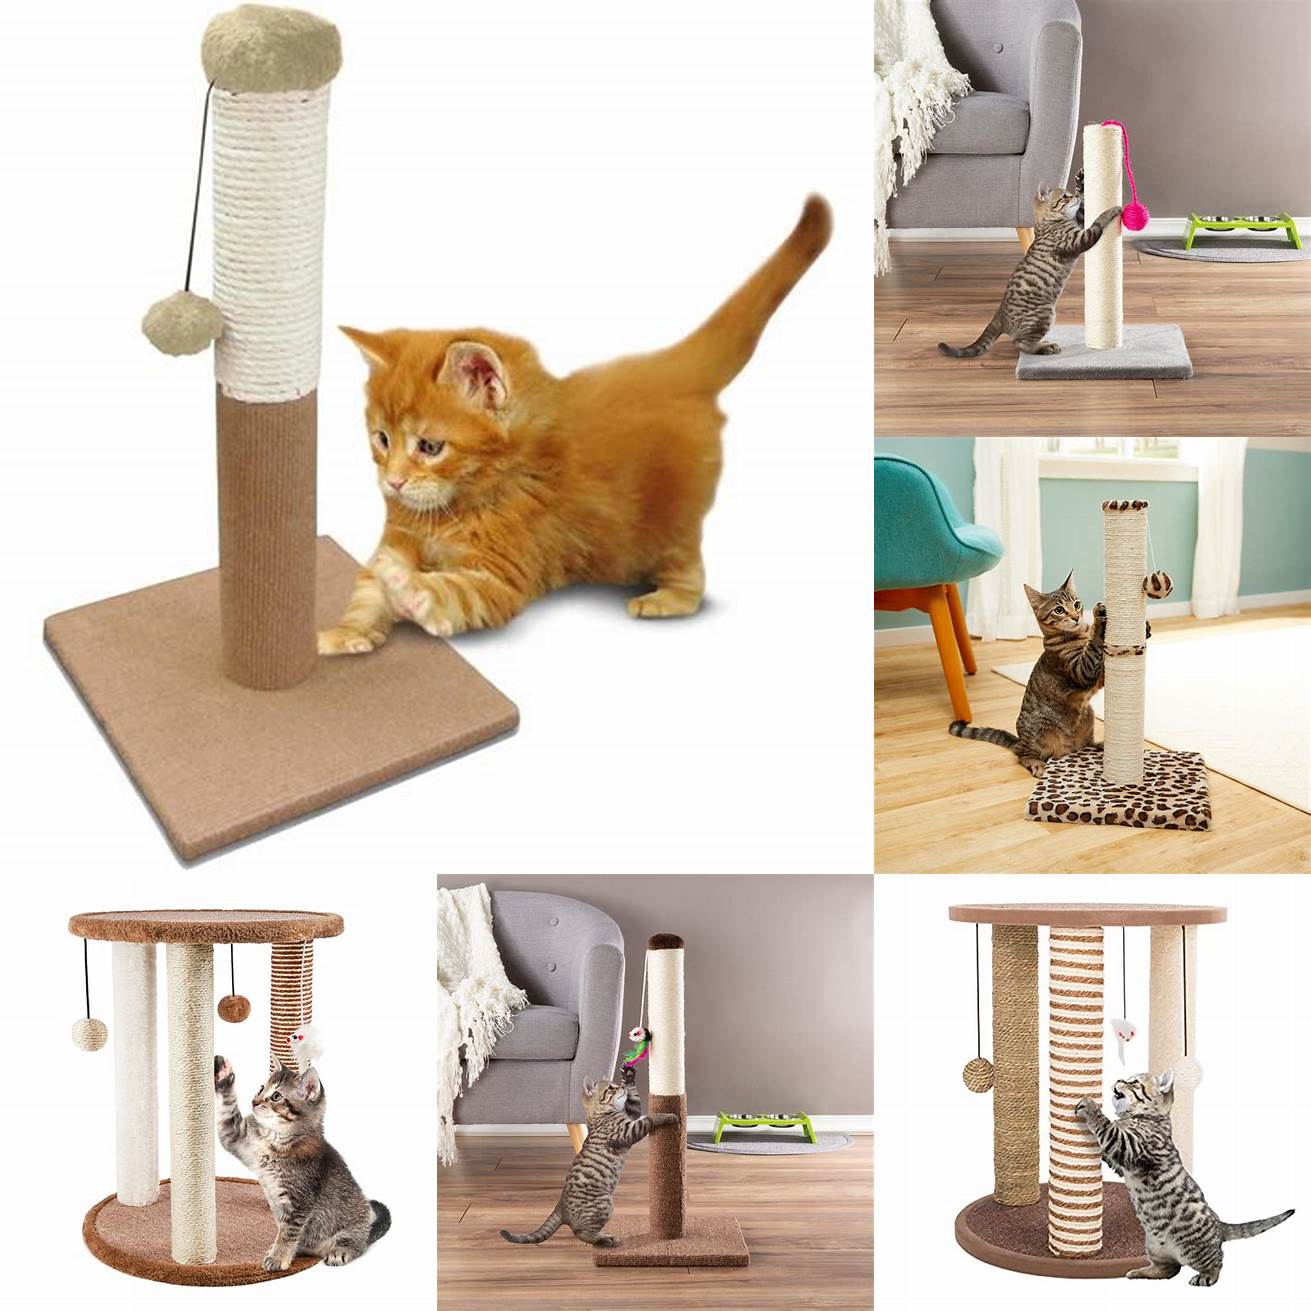 Provide plenty of toys and scratching posts to keep your cat entertained